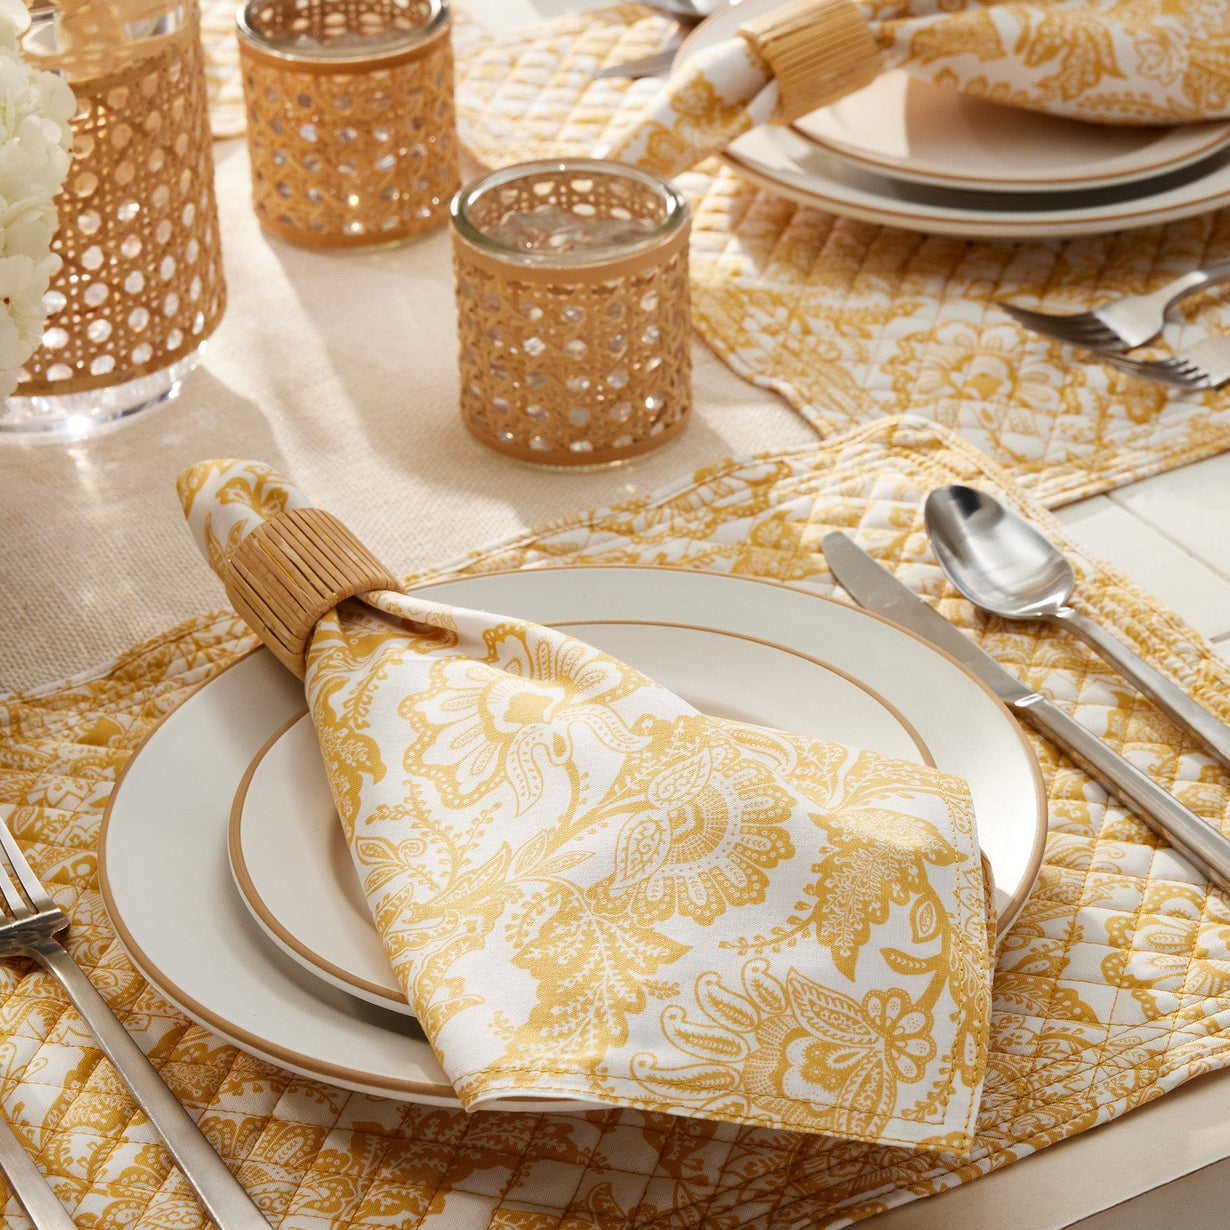 Place-settings with placemats and napkins featuring gold filigree design